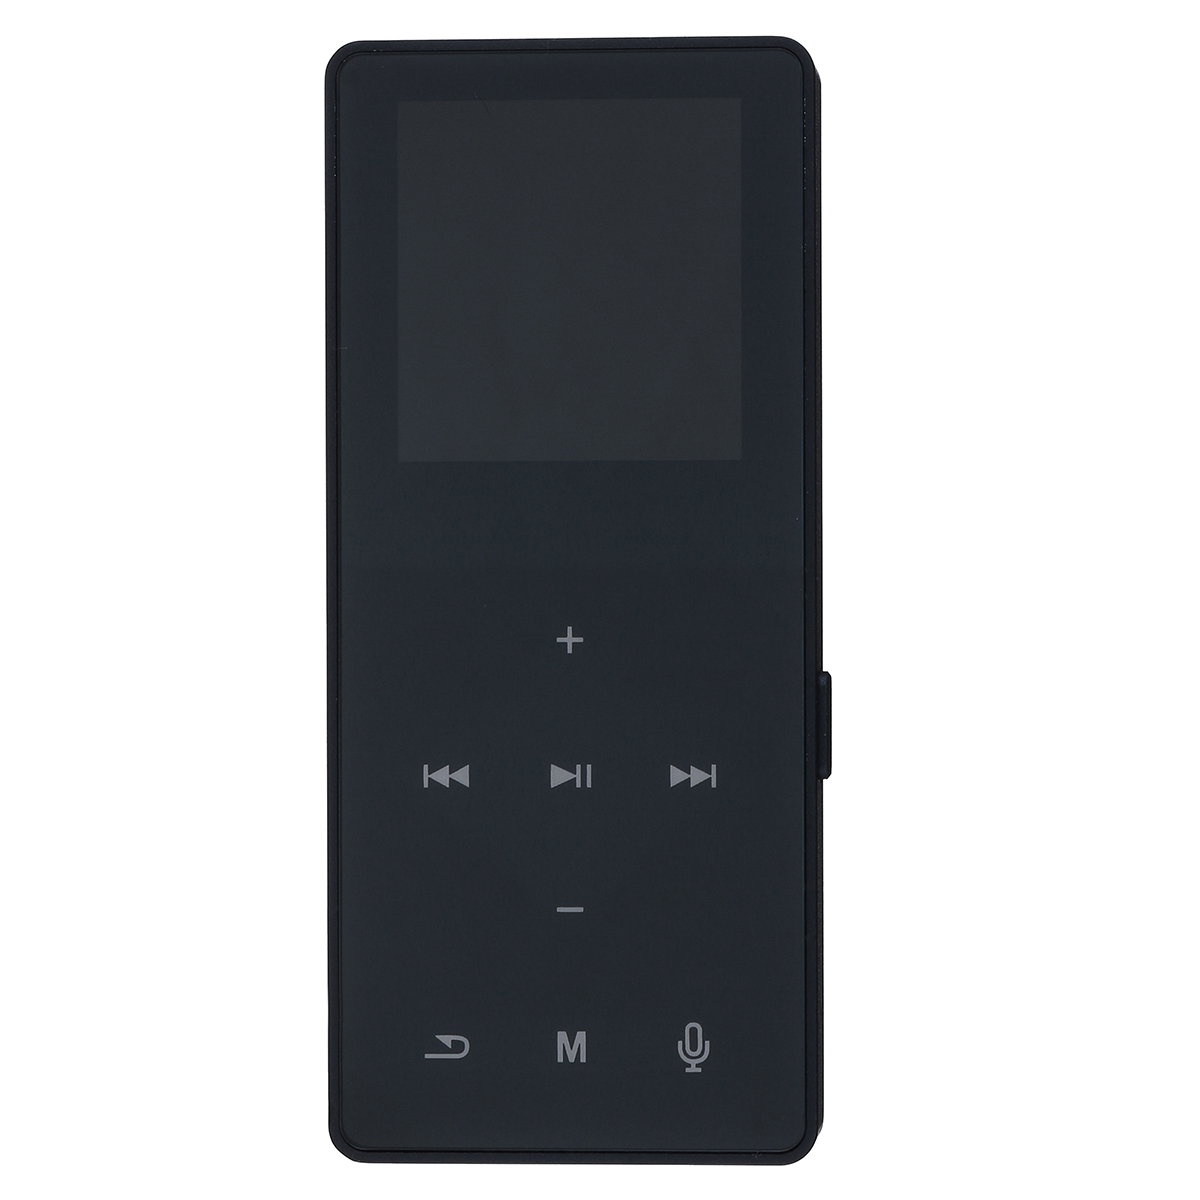 SD JS-03 1.8 Inch 8GB HIFI Lossless Touch Button FM Radio Record MP3 Music Player 9